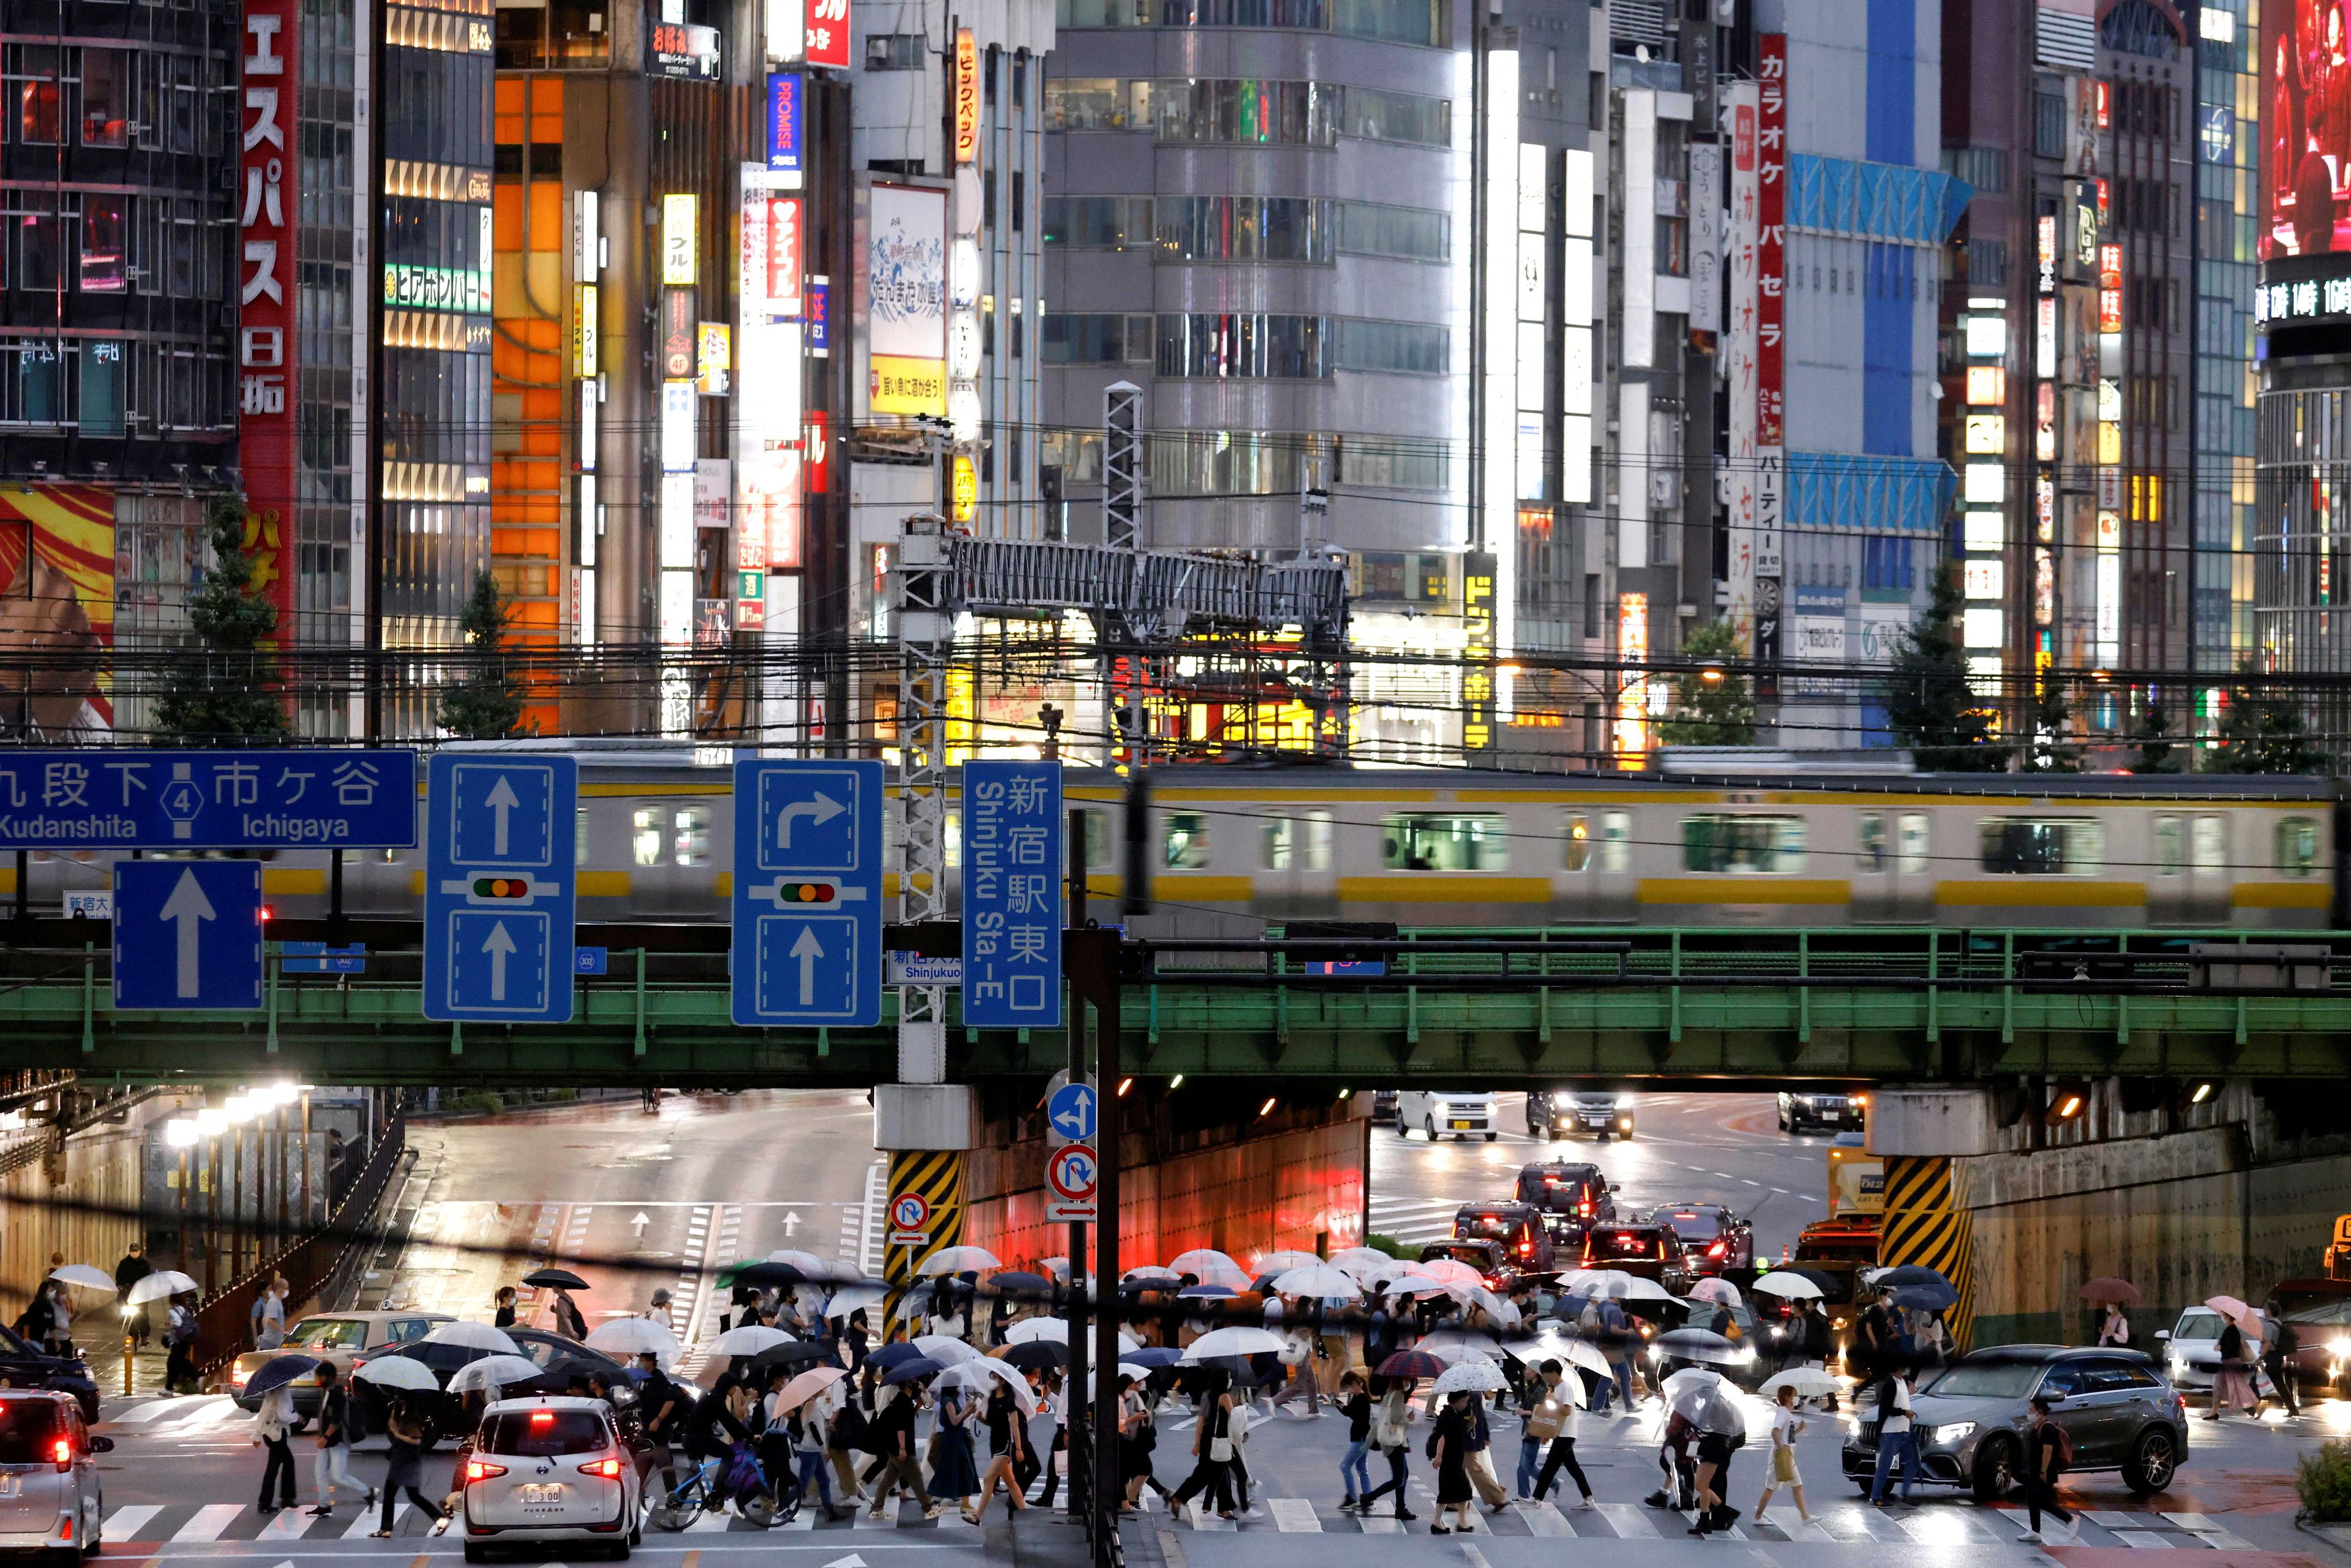 Commuters make their way along an avenue next to Shinjuku station during a rainy day in Tokyo, Japan, Aug. 14, 2021. Photo: Reuters